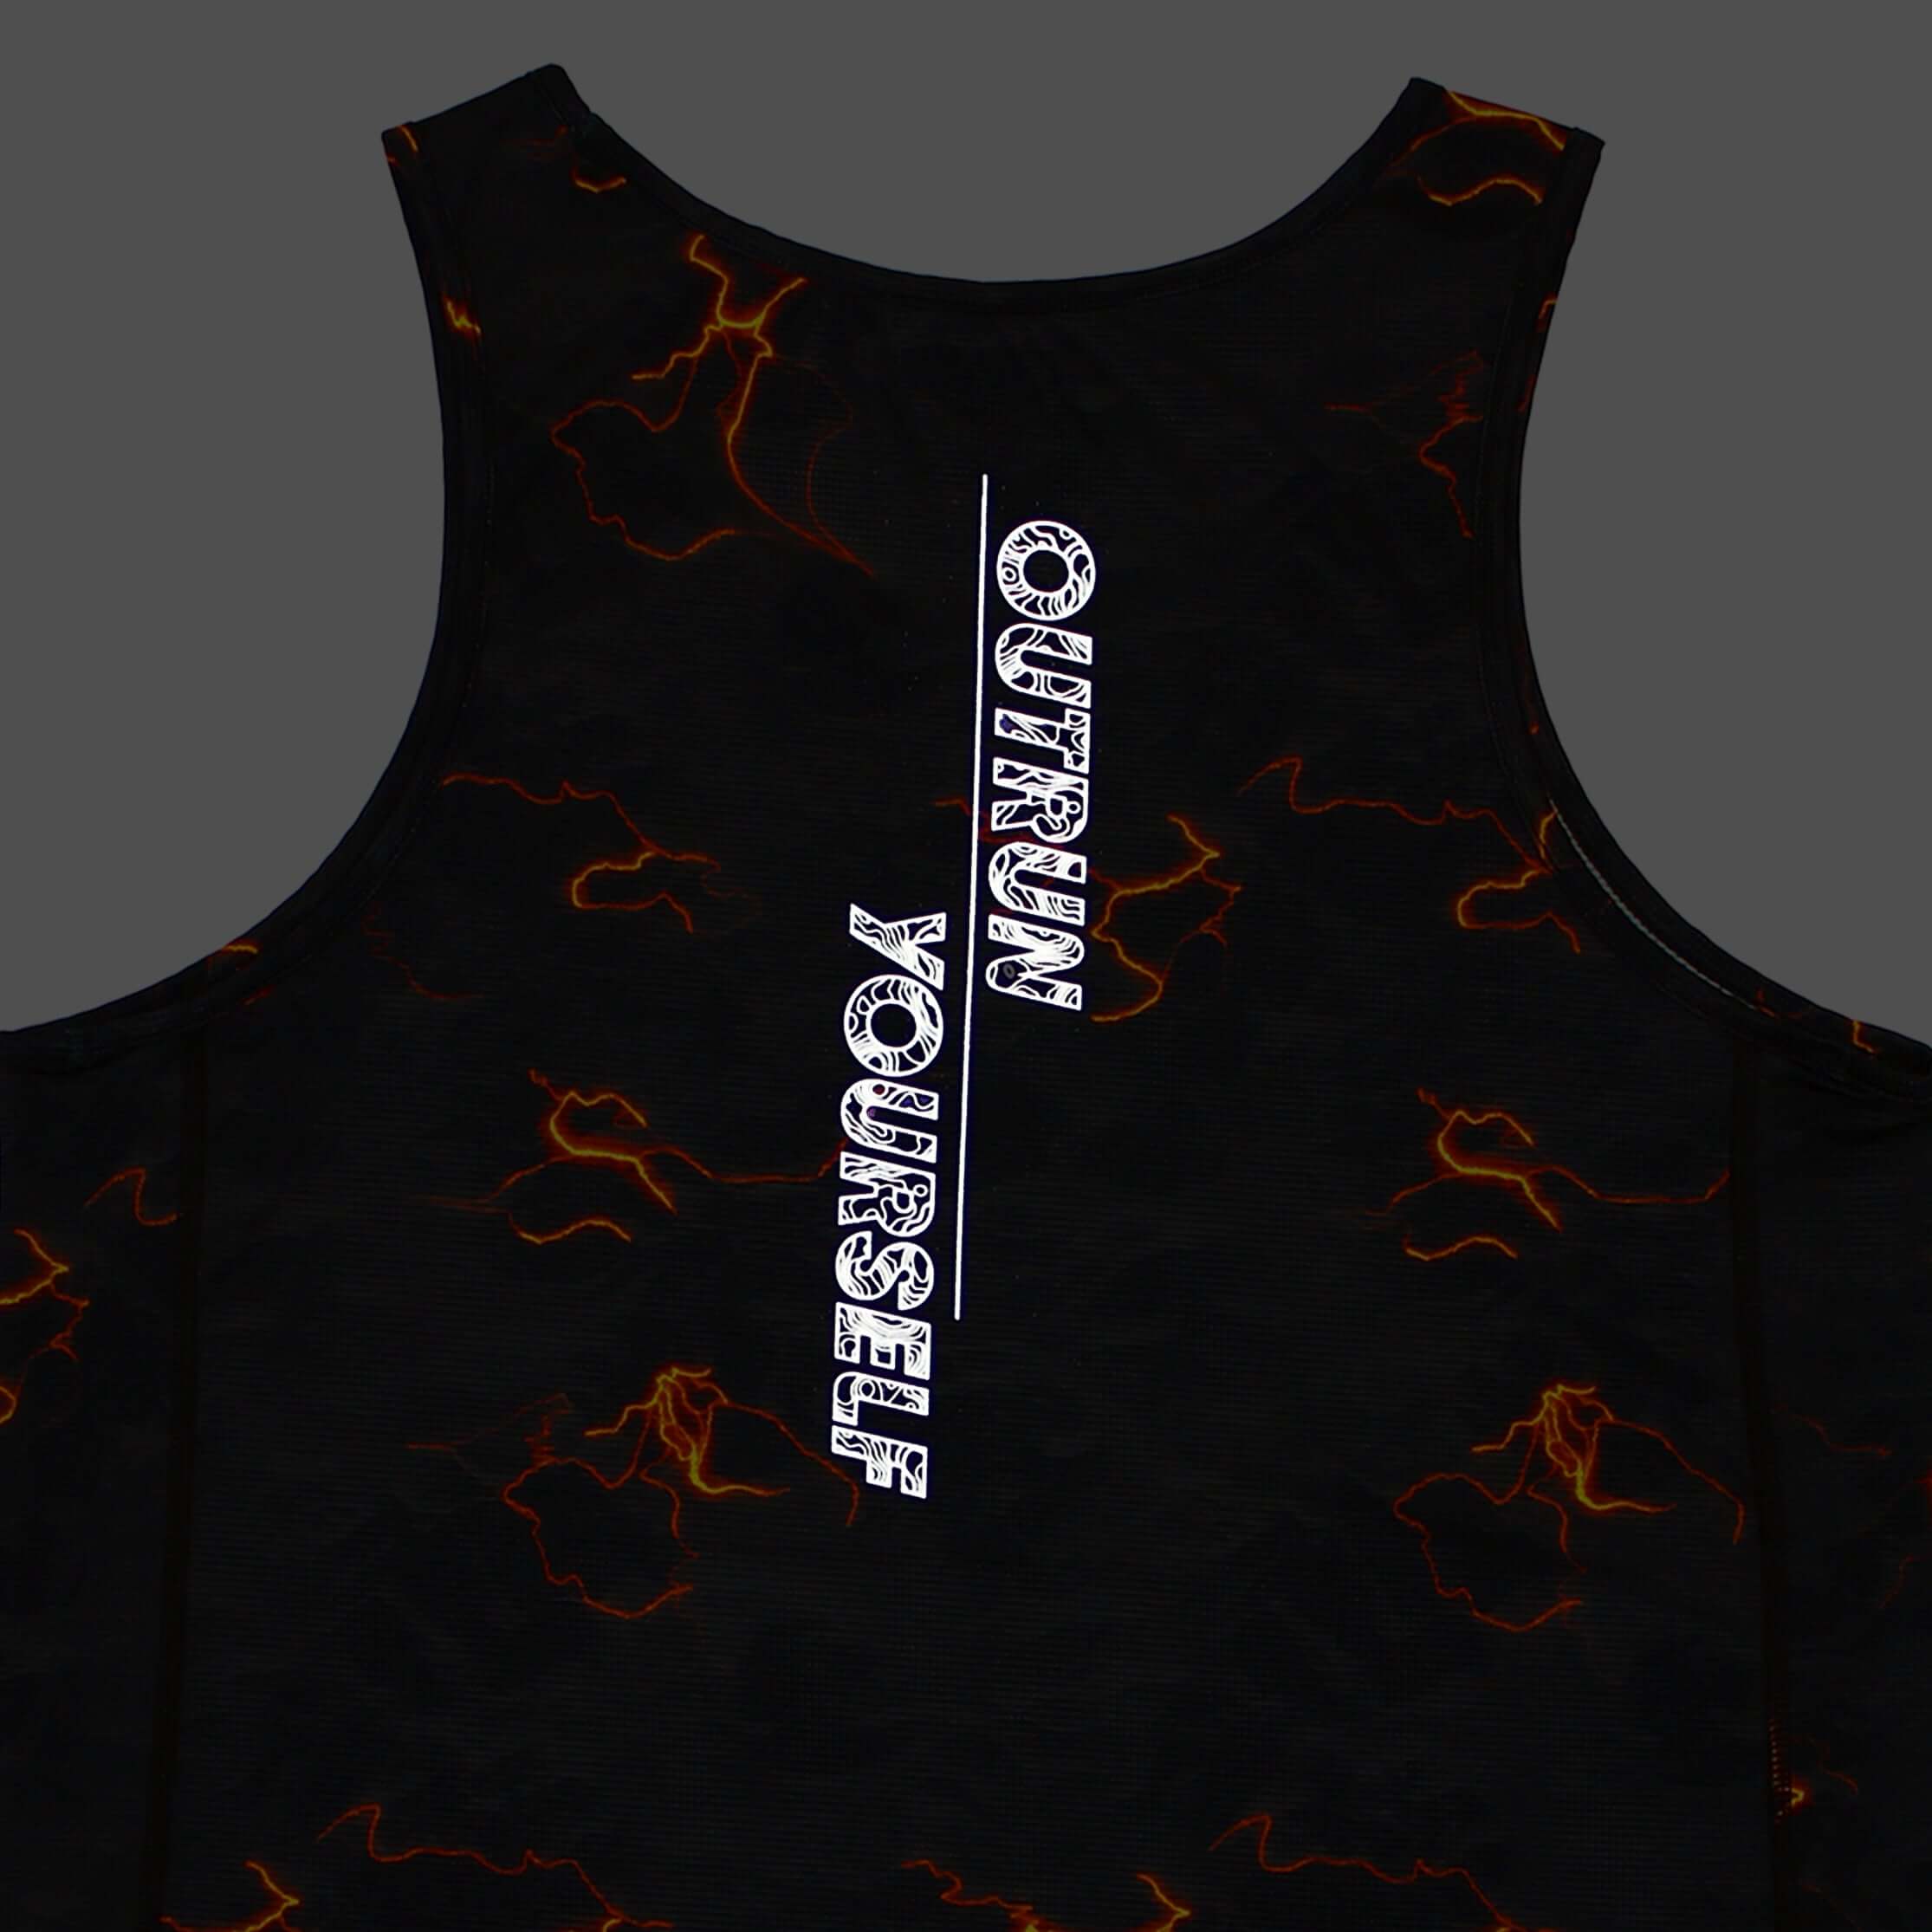 Running Singlet for high intensity workouts and race. Lightweight and breathable made from Recycling Polyester.